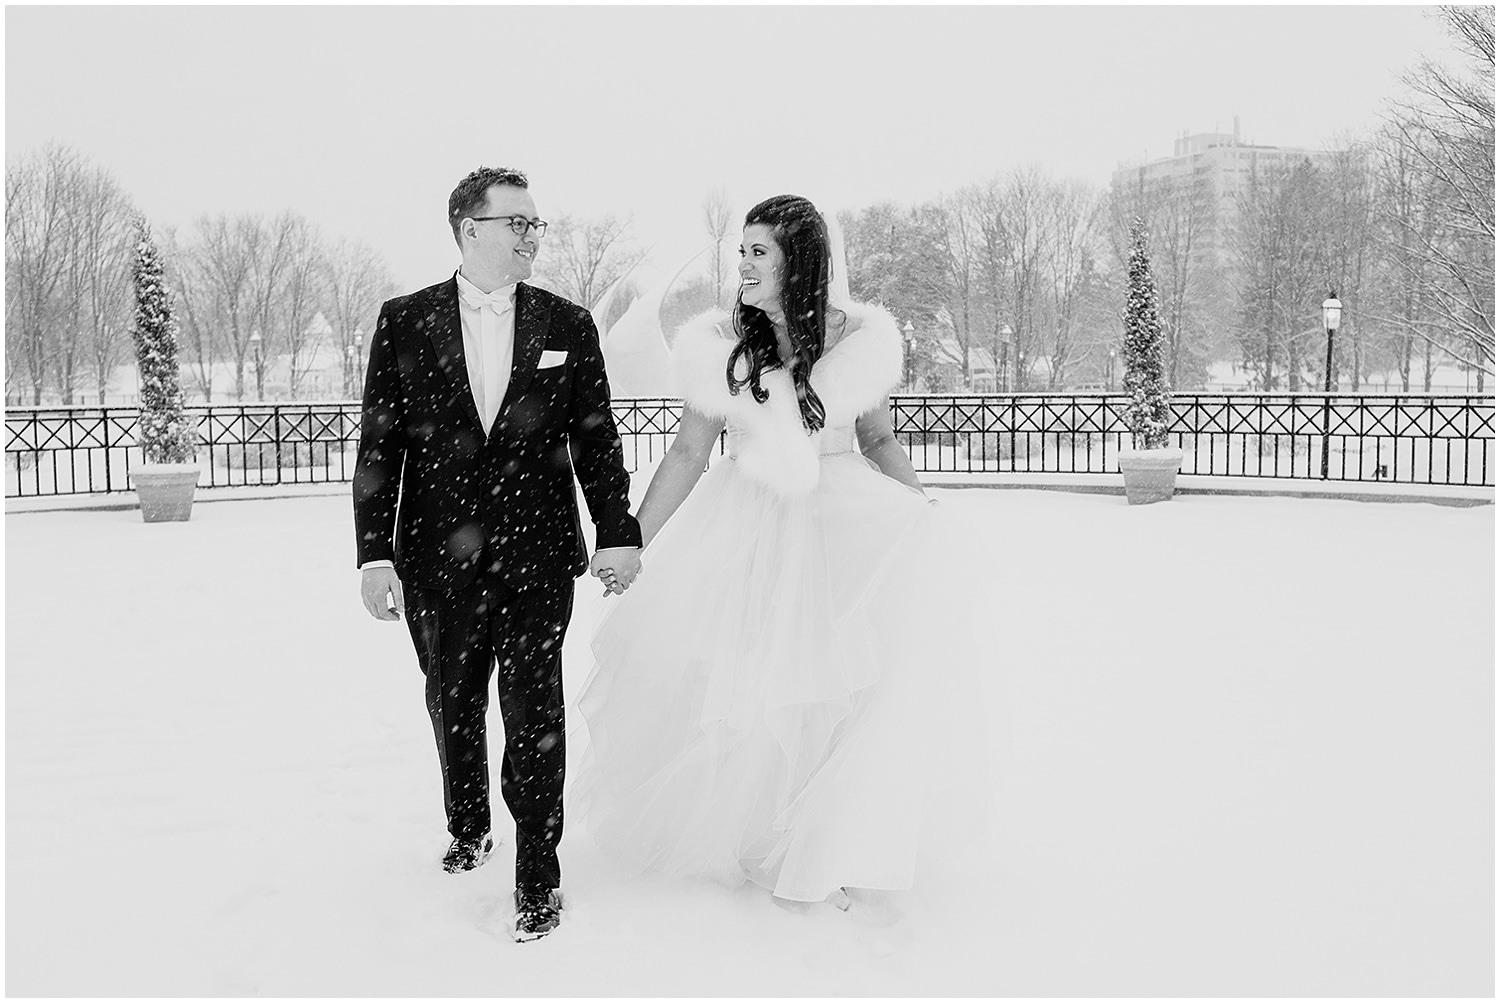 adam lowe photography, wedding, style, love, franklin park conservatory, FPC, columbus, ohio, winter wedding, madison house floral, ivy bridal studio, the black tux,guilded social, jenny yoo, victorias secret,hayley paige, justine m couture, jimmy choo, tiffany and co, james allen